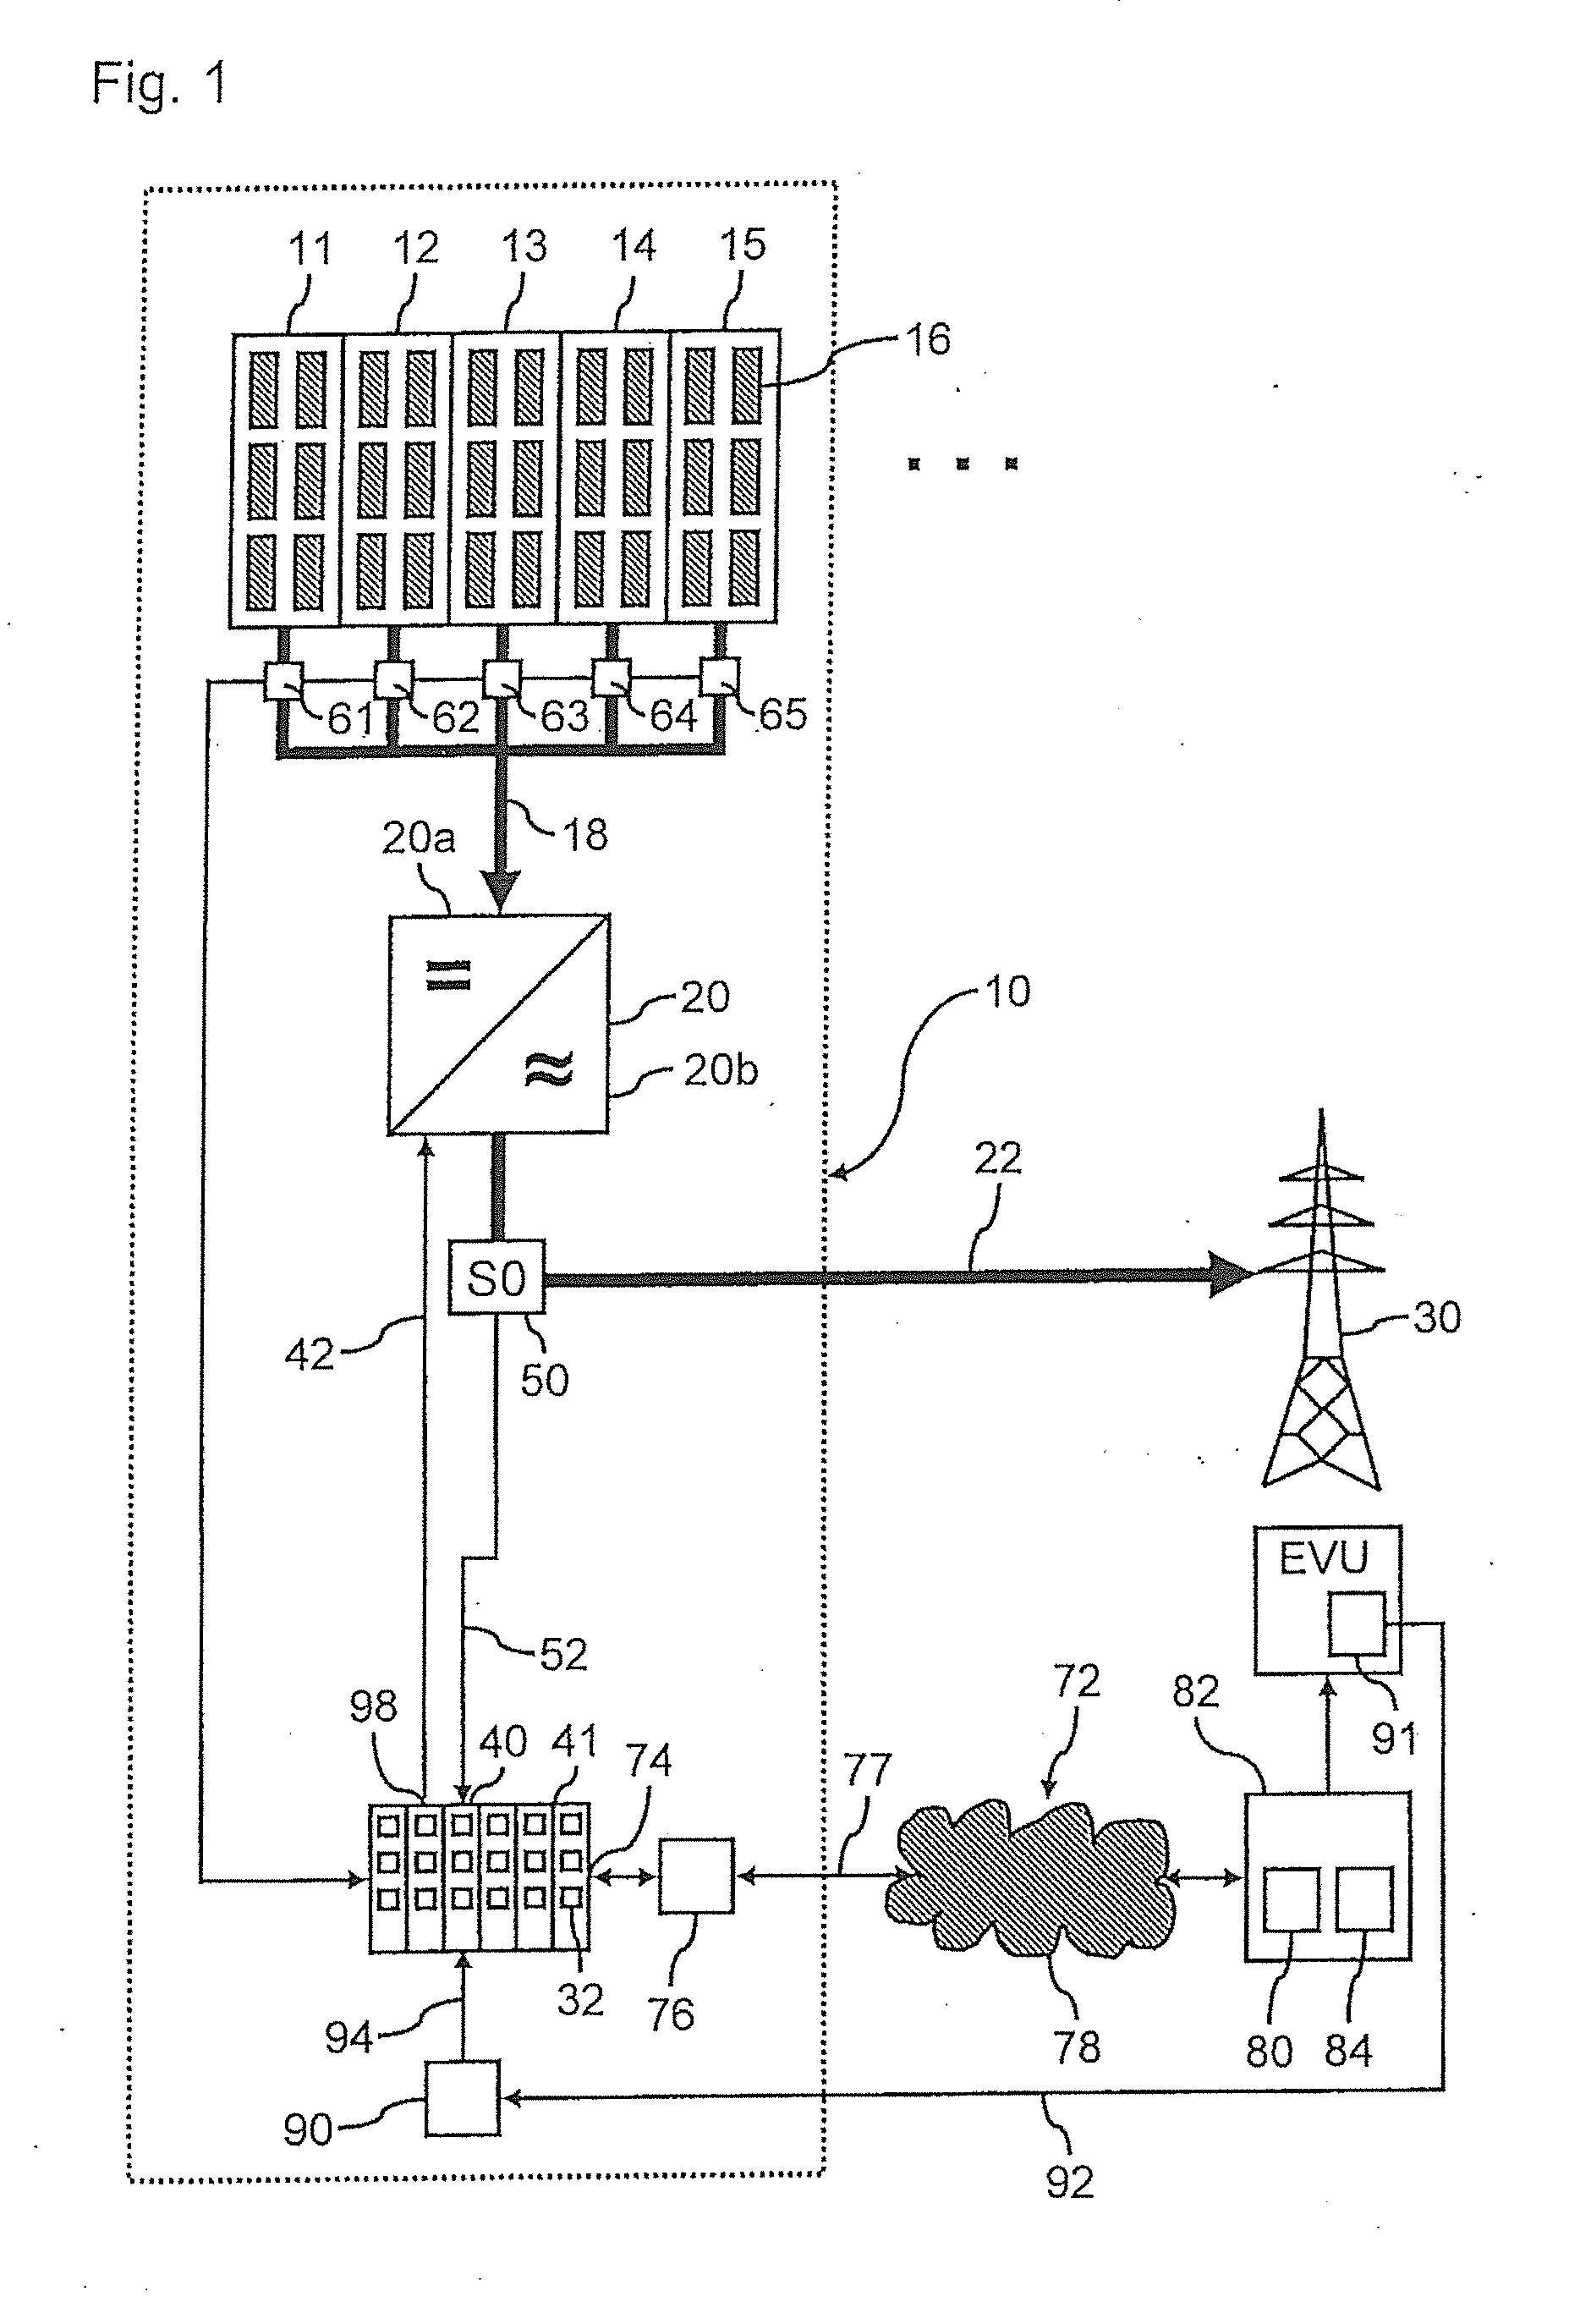 Method for Controlling PV Installations in an Electrical Grid